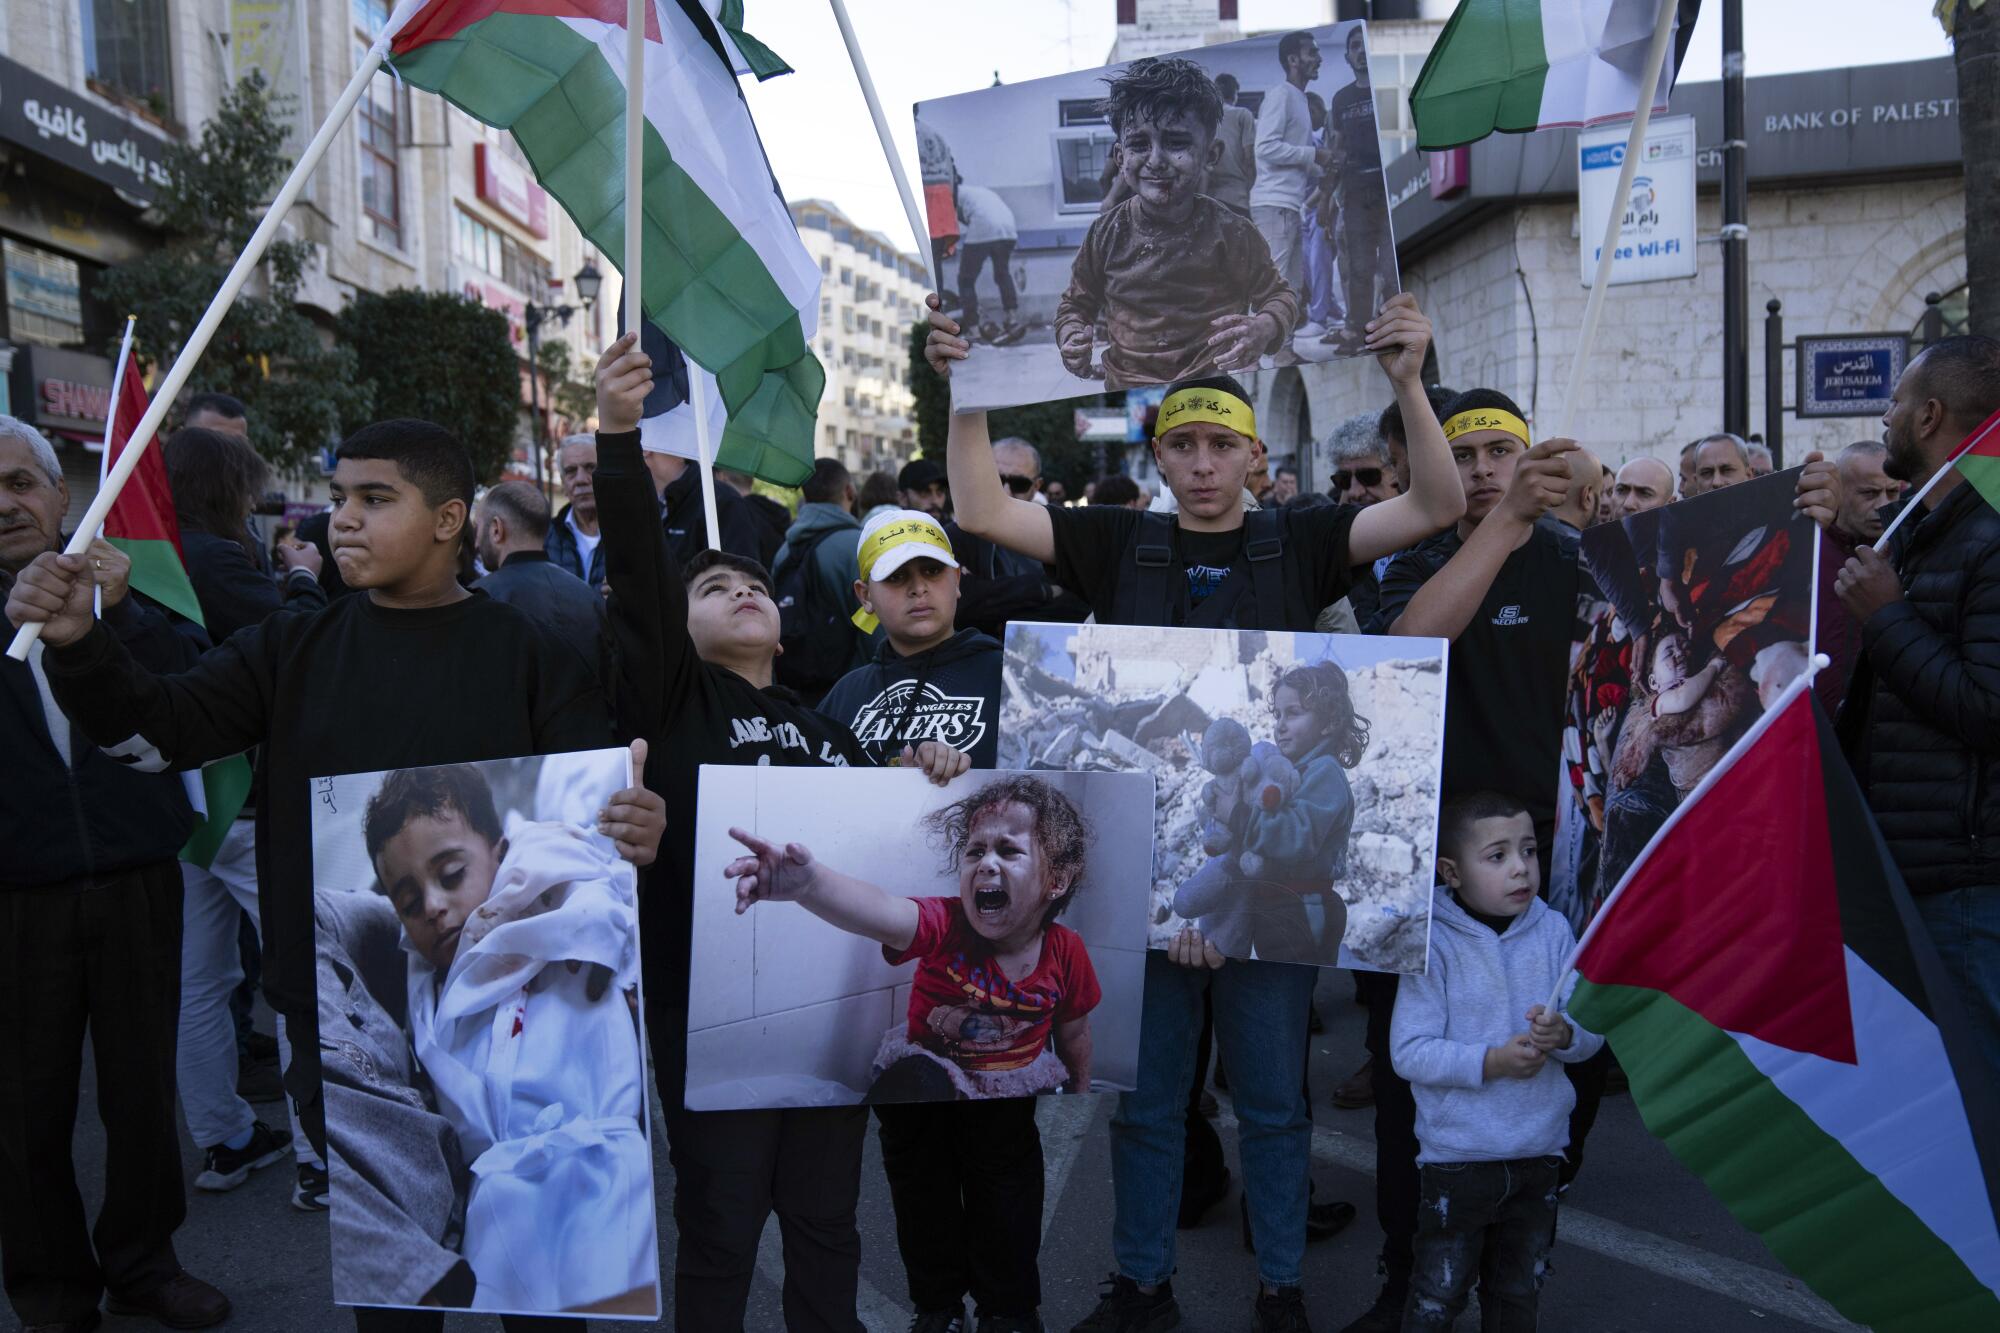 Demonstrators march with posters showing photos of injured or screaming children.